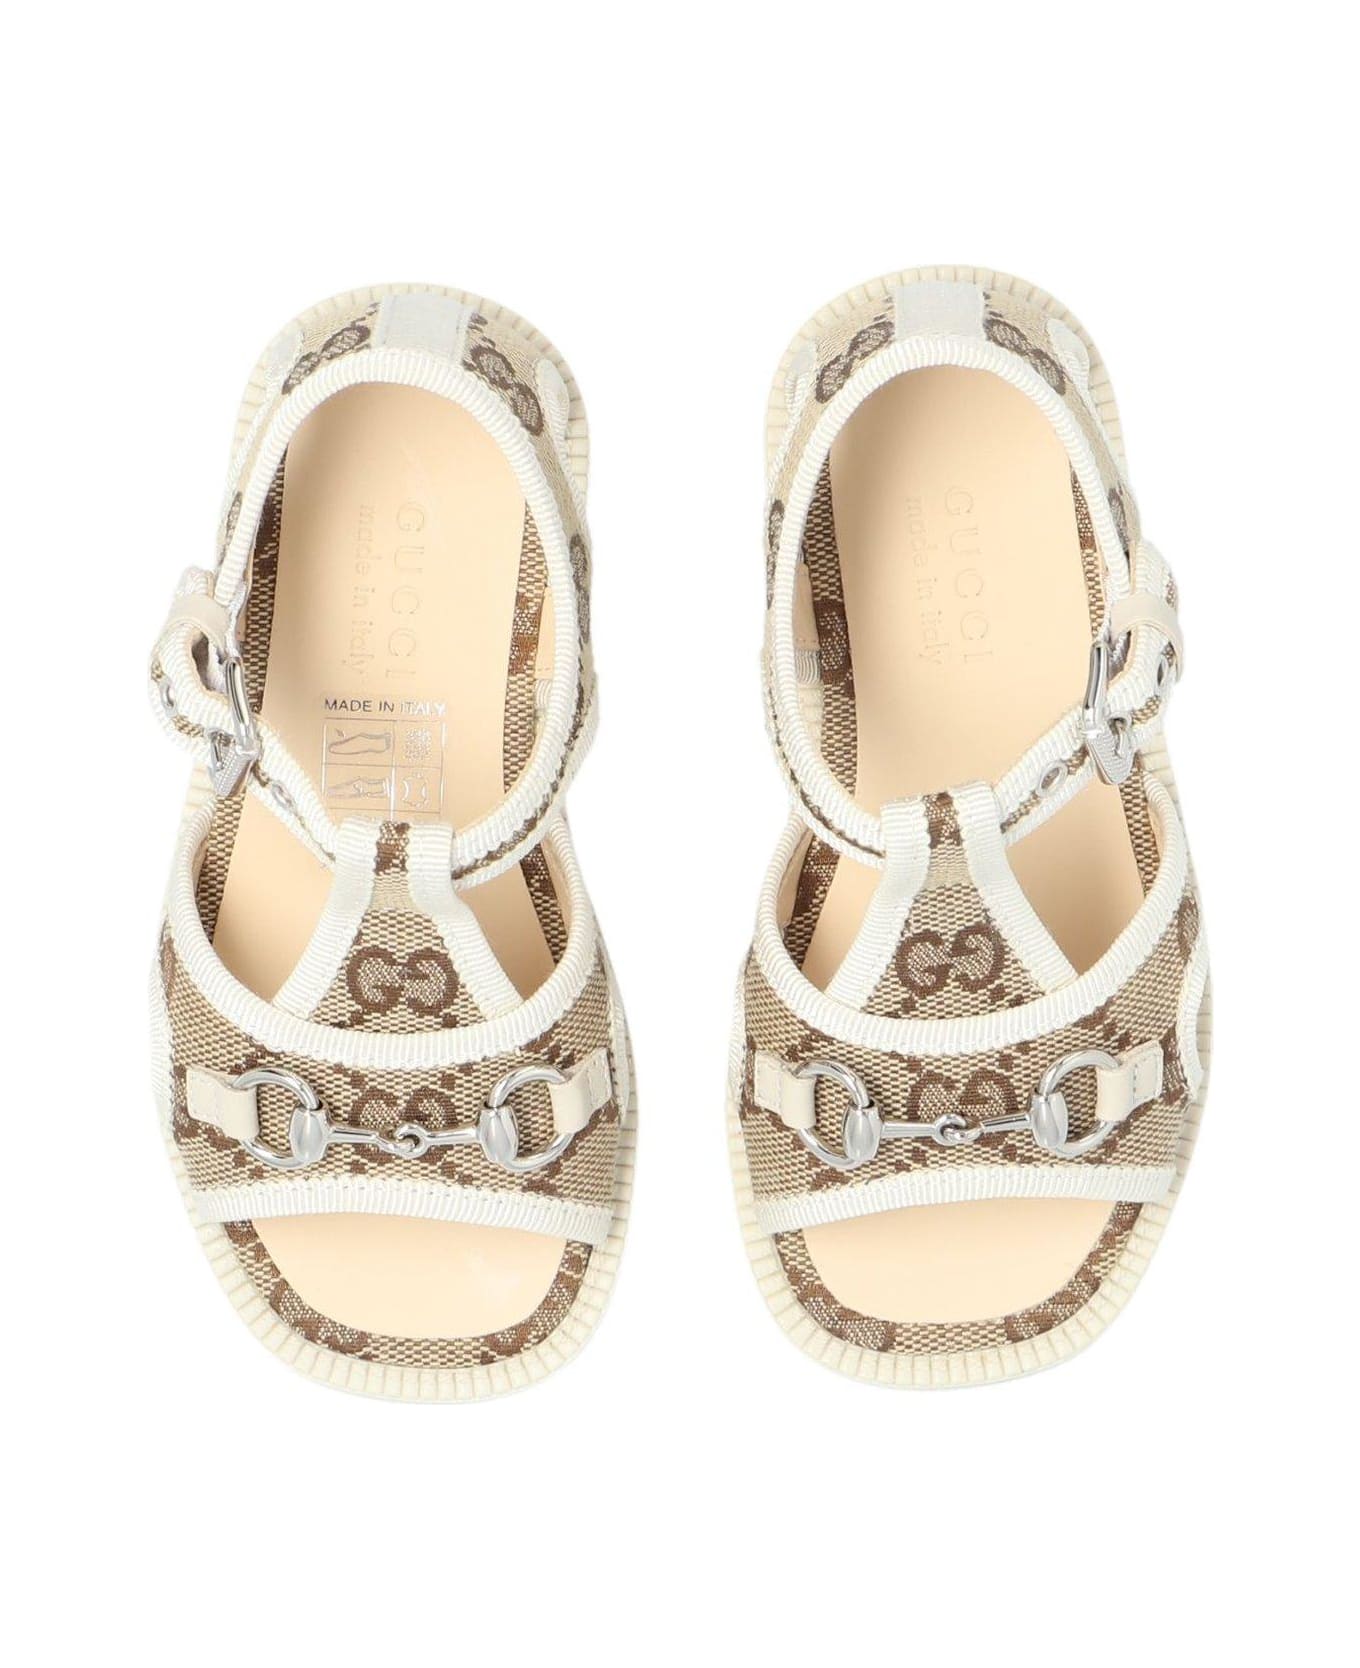 Gucci Buckled Open Toe Sandals - Panna